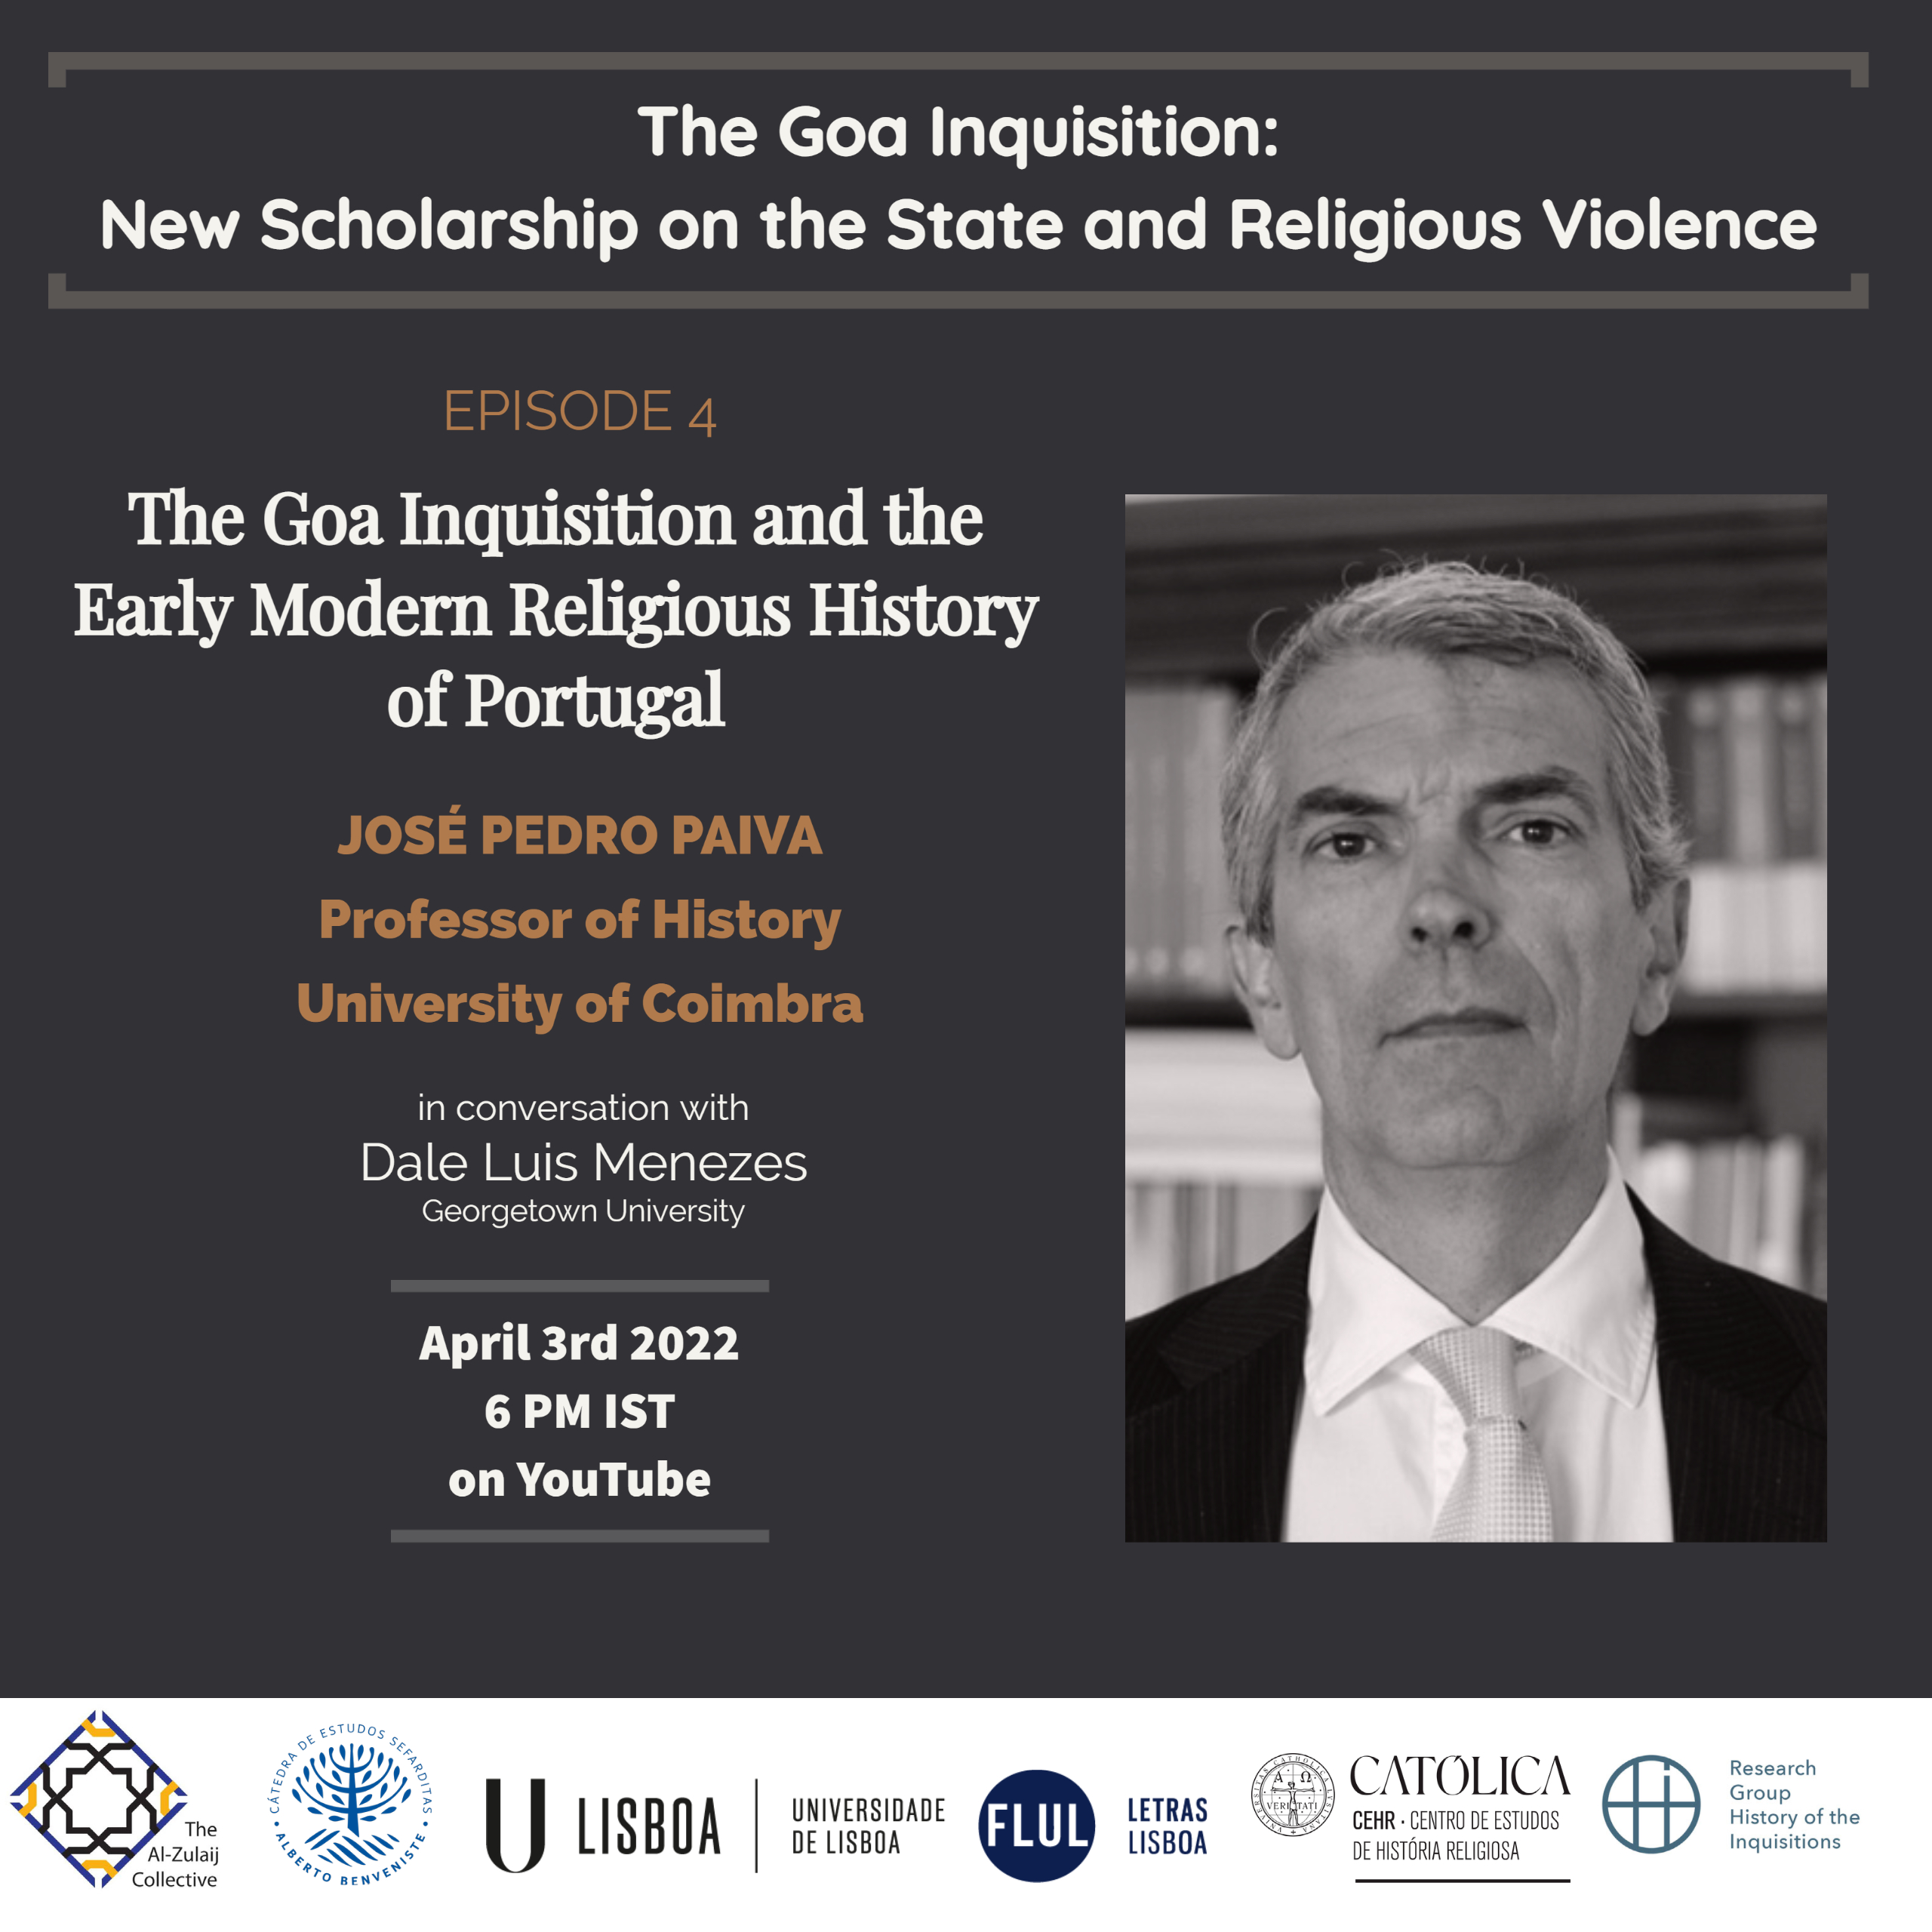 The Goa Inquisition. New Perspective on the State and Religious Violence